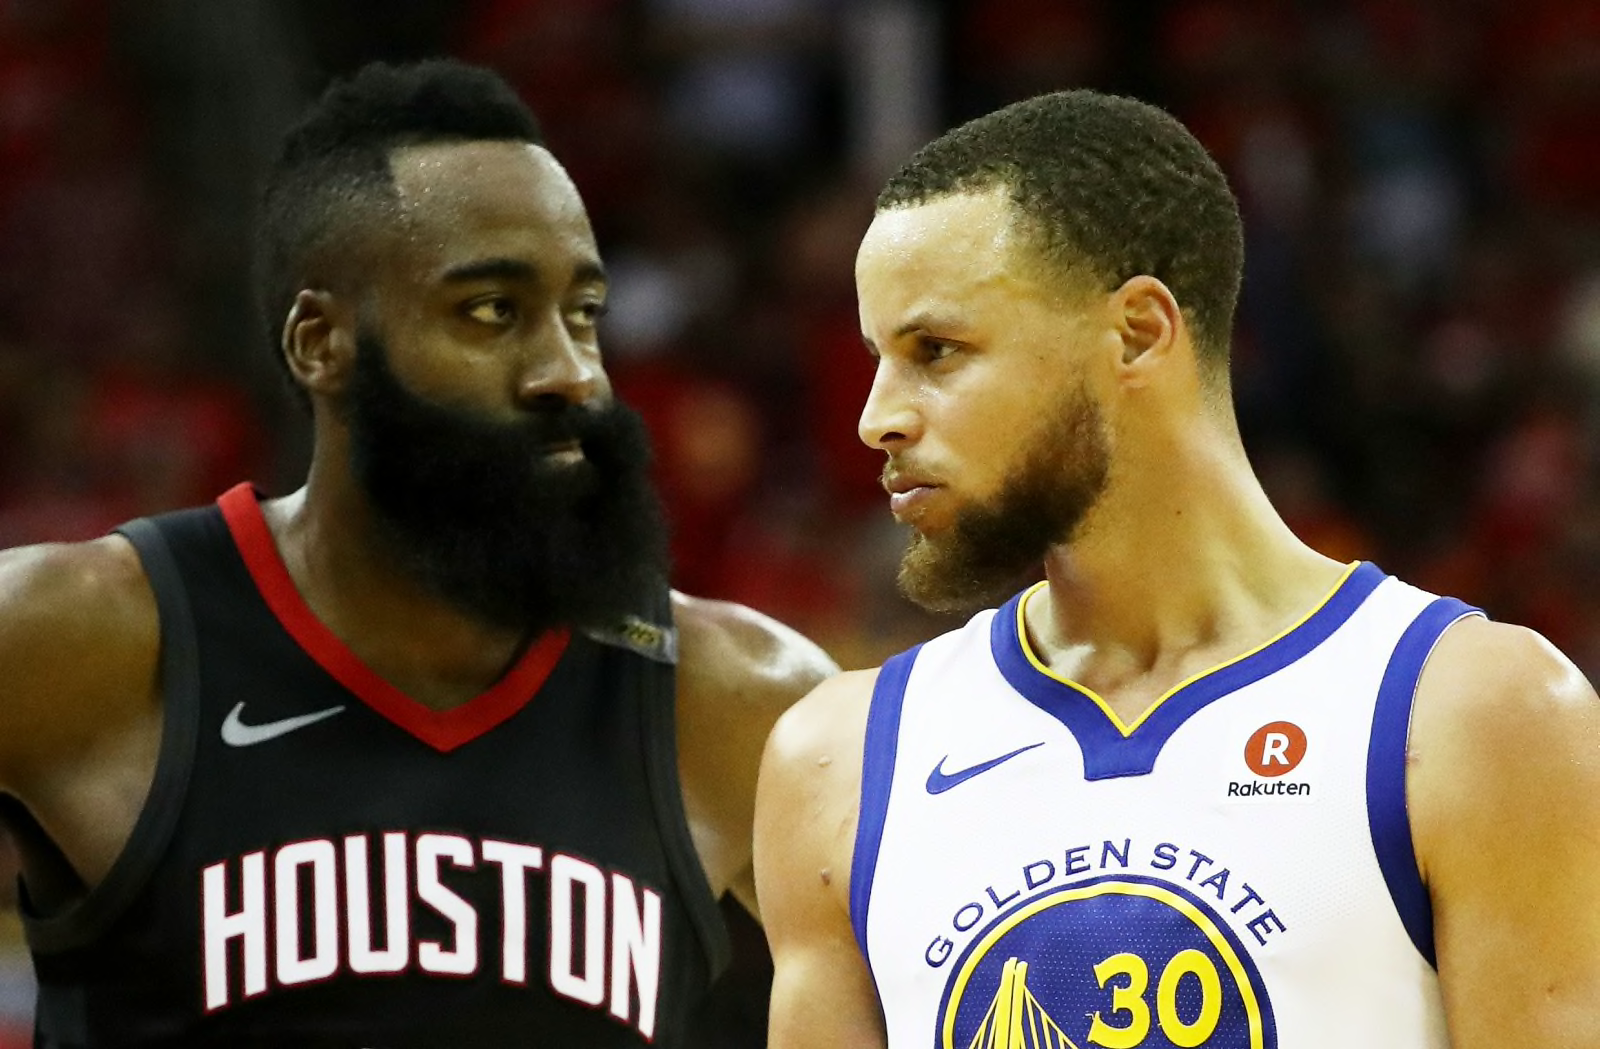 Why Houston Rockets James Harden is better than Stephen Curry